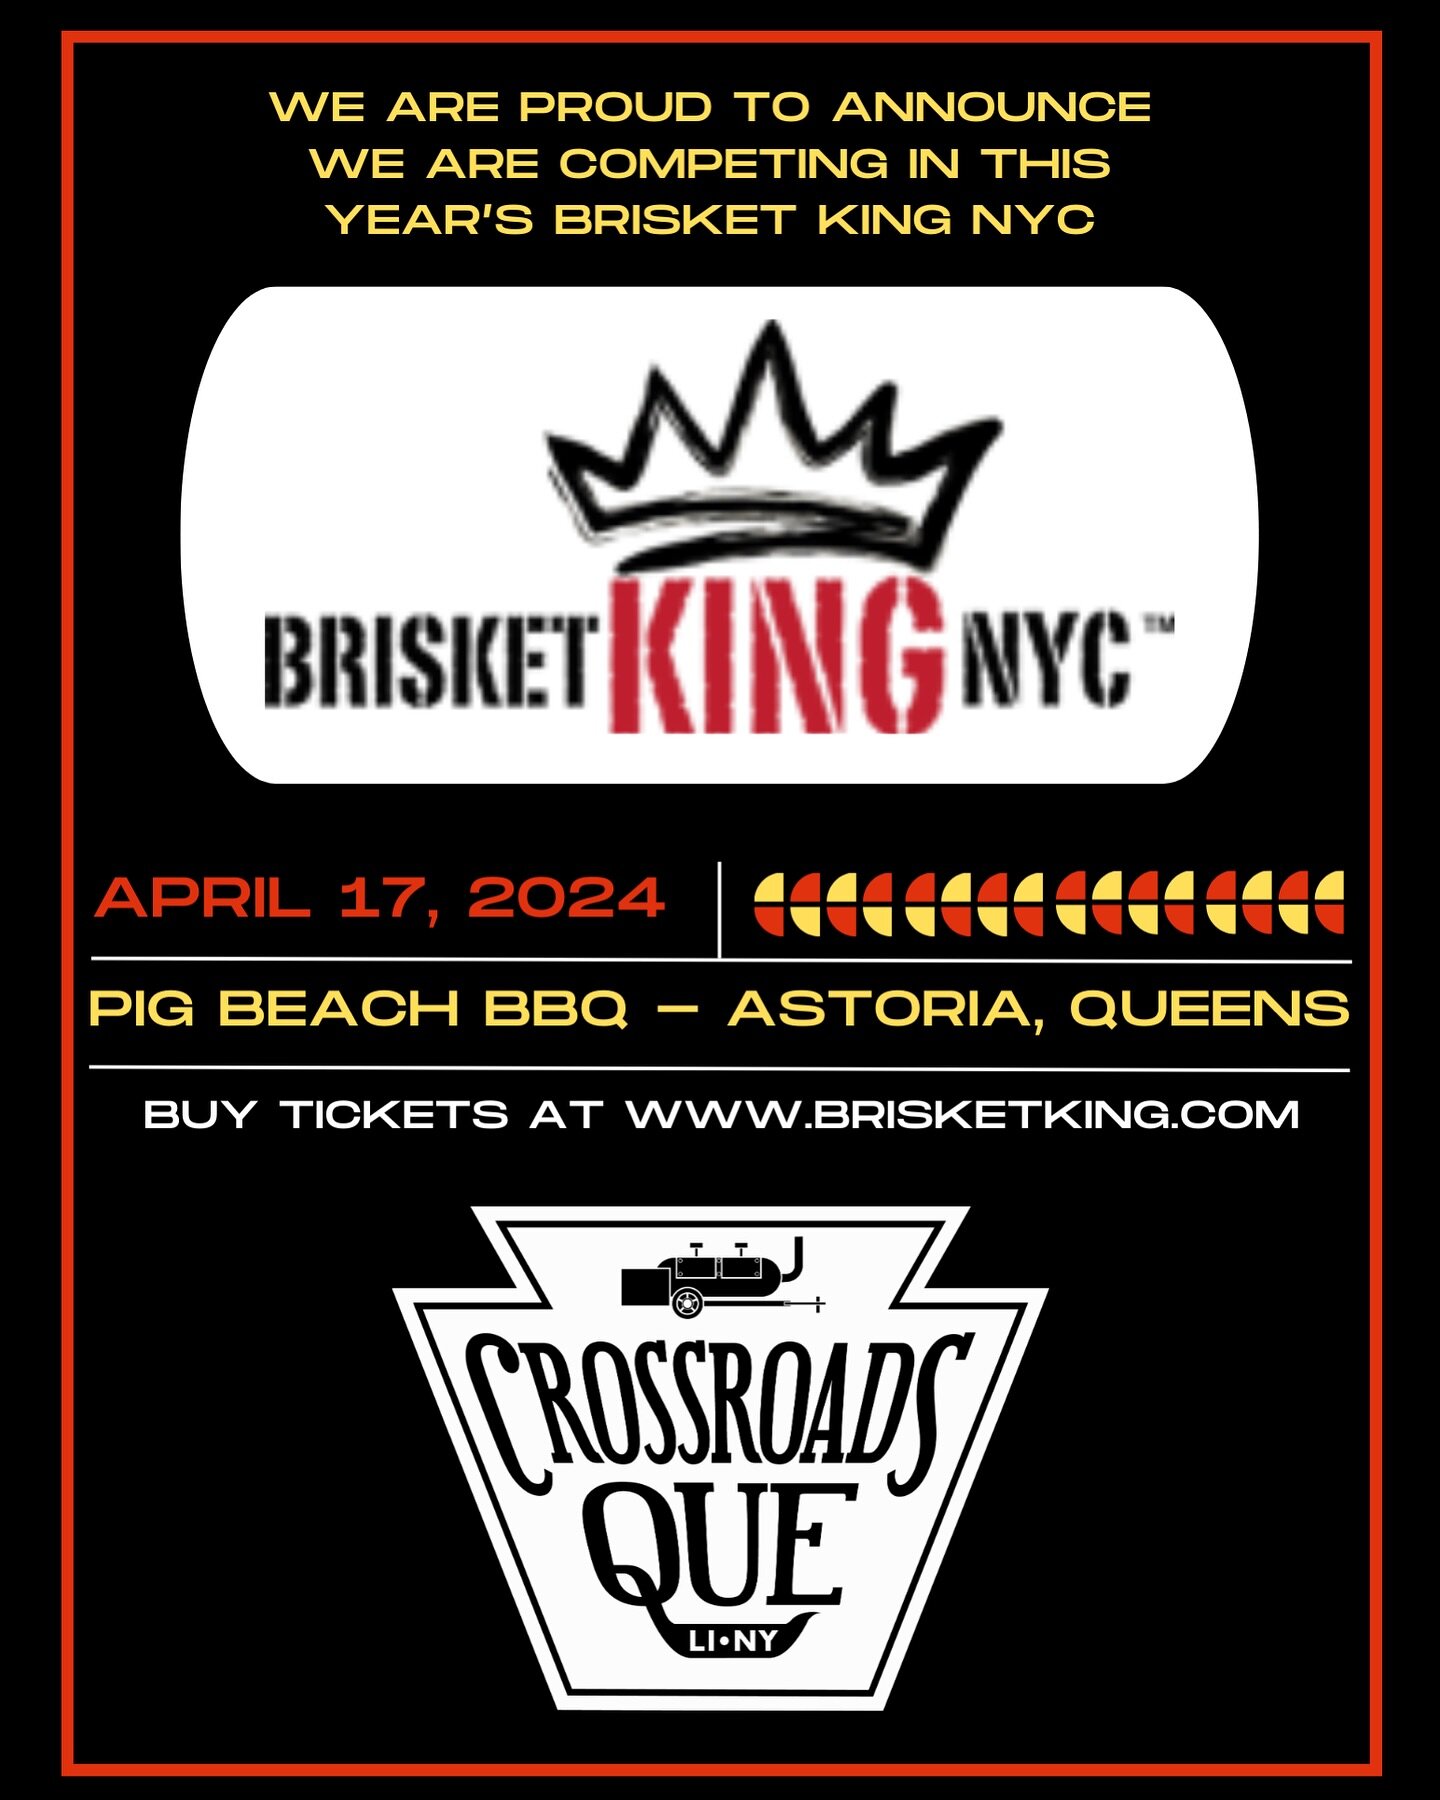 BREAKING NEWS! Mark your calendars, we will be competing in this year&rsquo;s @brisketkingnyc! It&rsquo;s hosted at the amazing @pig_beach_queens so buy your tickets and bring a friend, you won&rsquo;t want to miss this special event. 
#brisketkingny